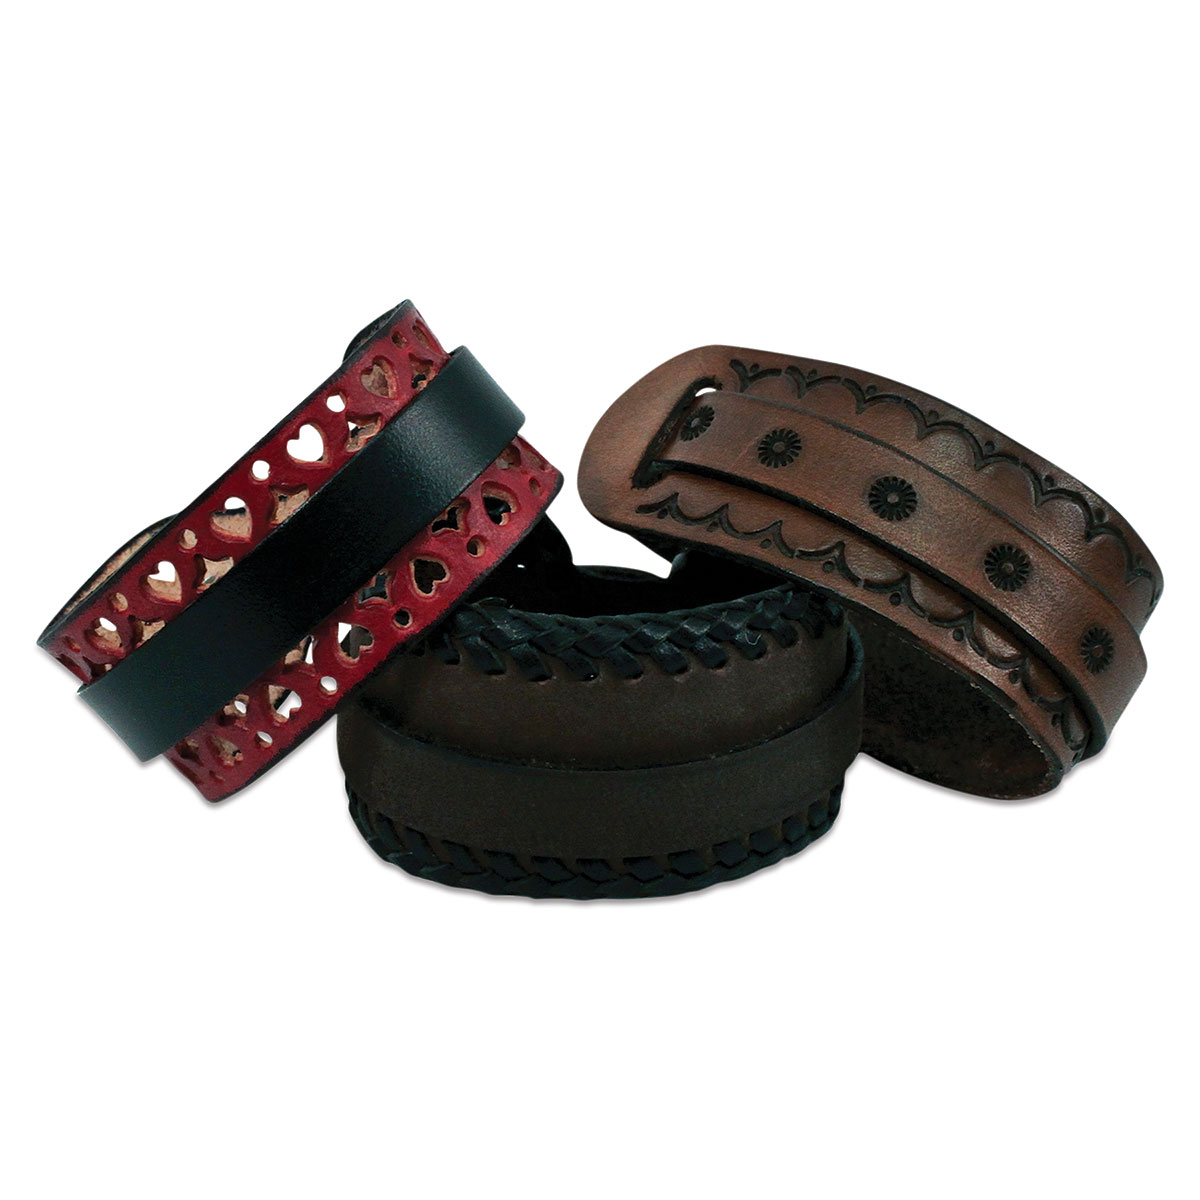 Realeather Leather Wrap Cuff Bracelets | BLICK Art Materials